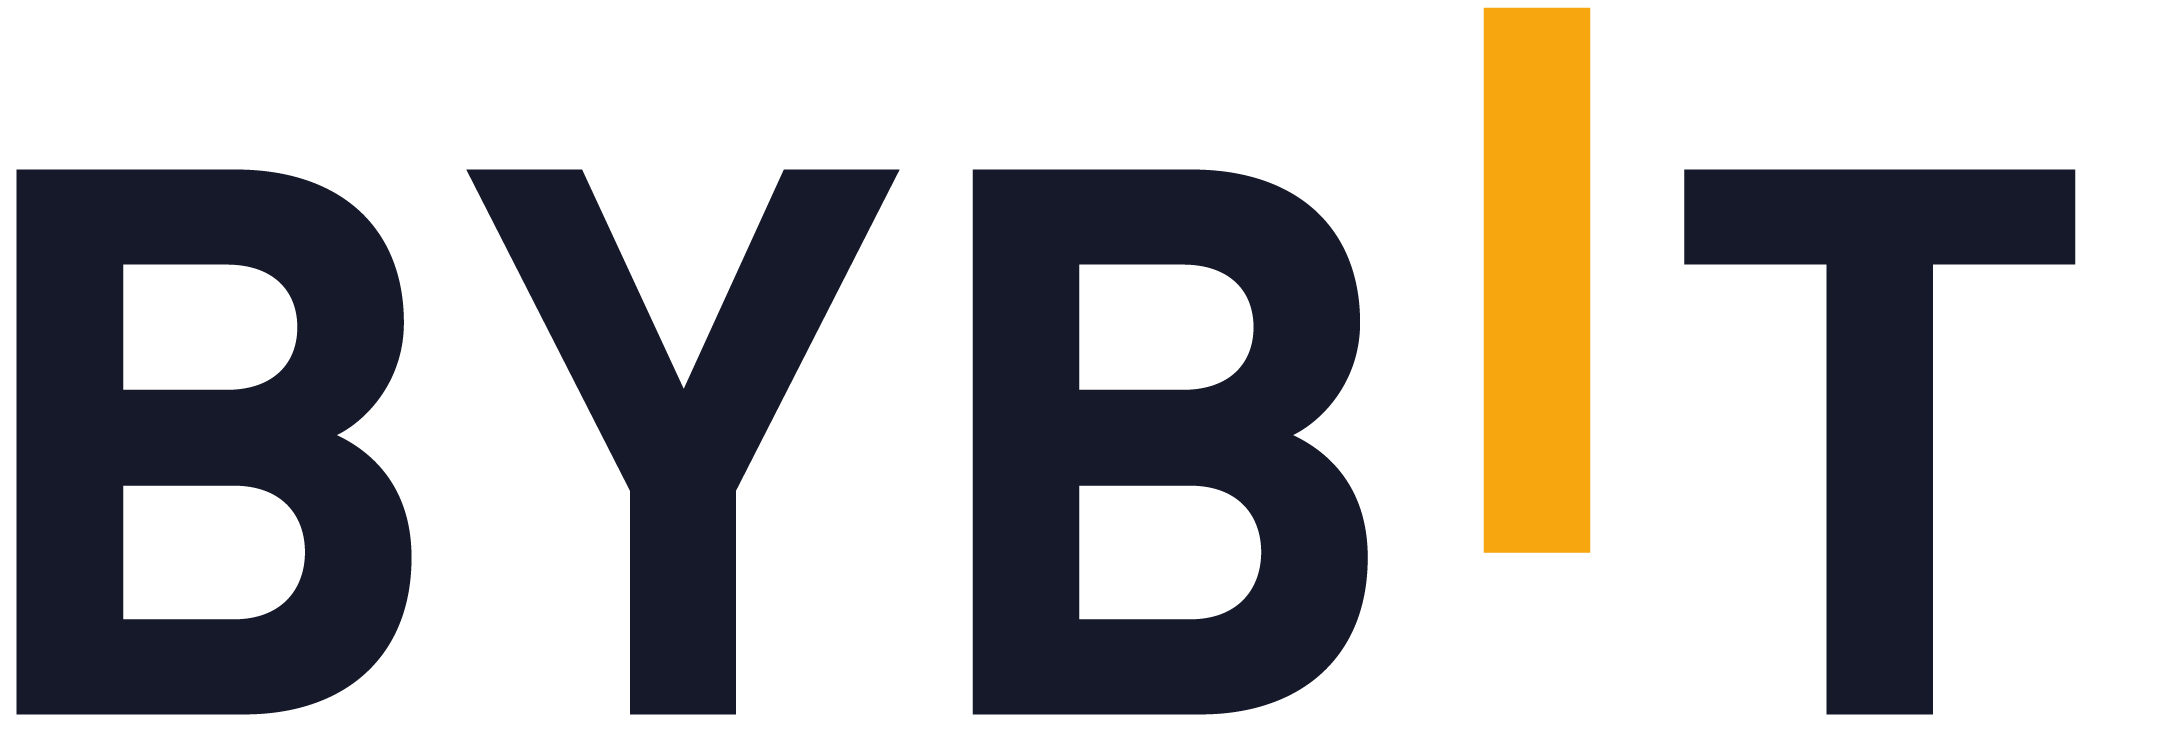 Bybit-logo_(cropped).png